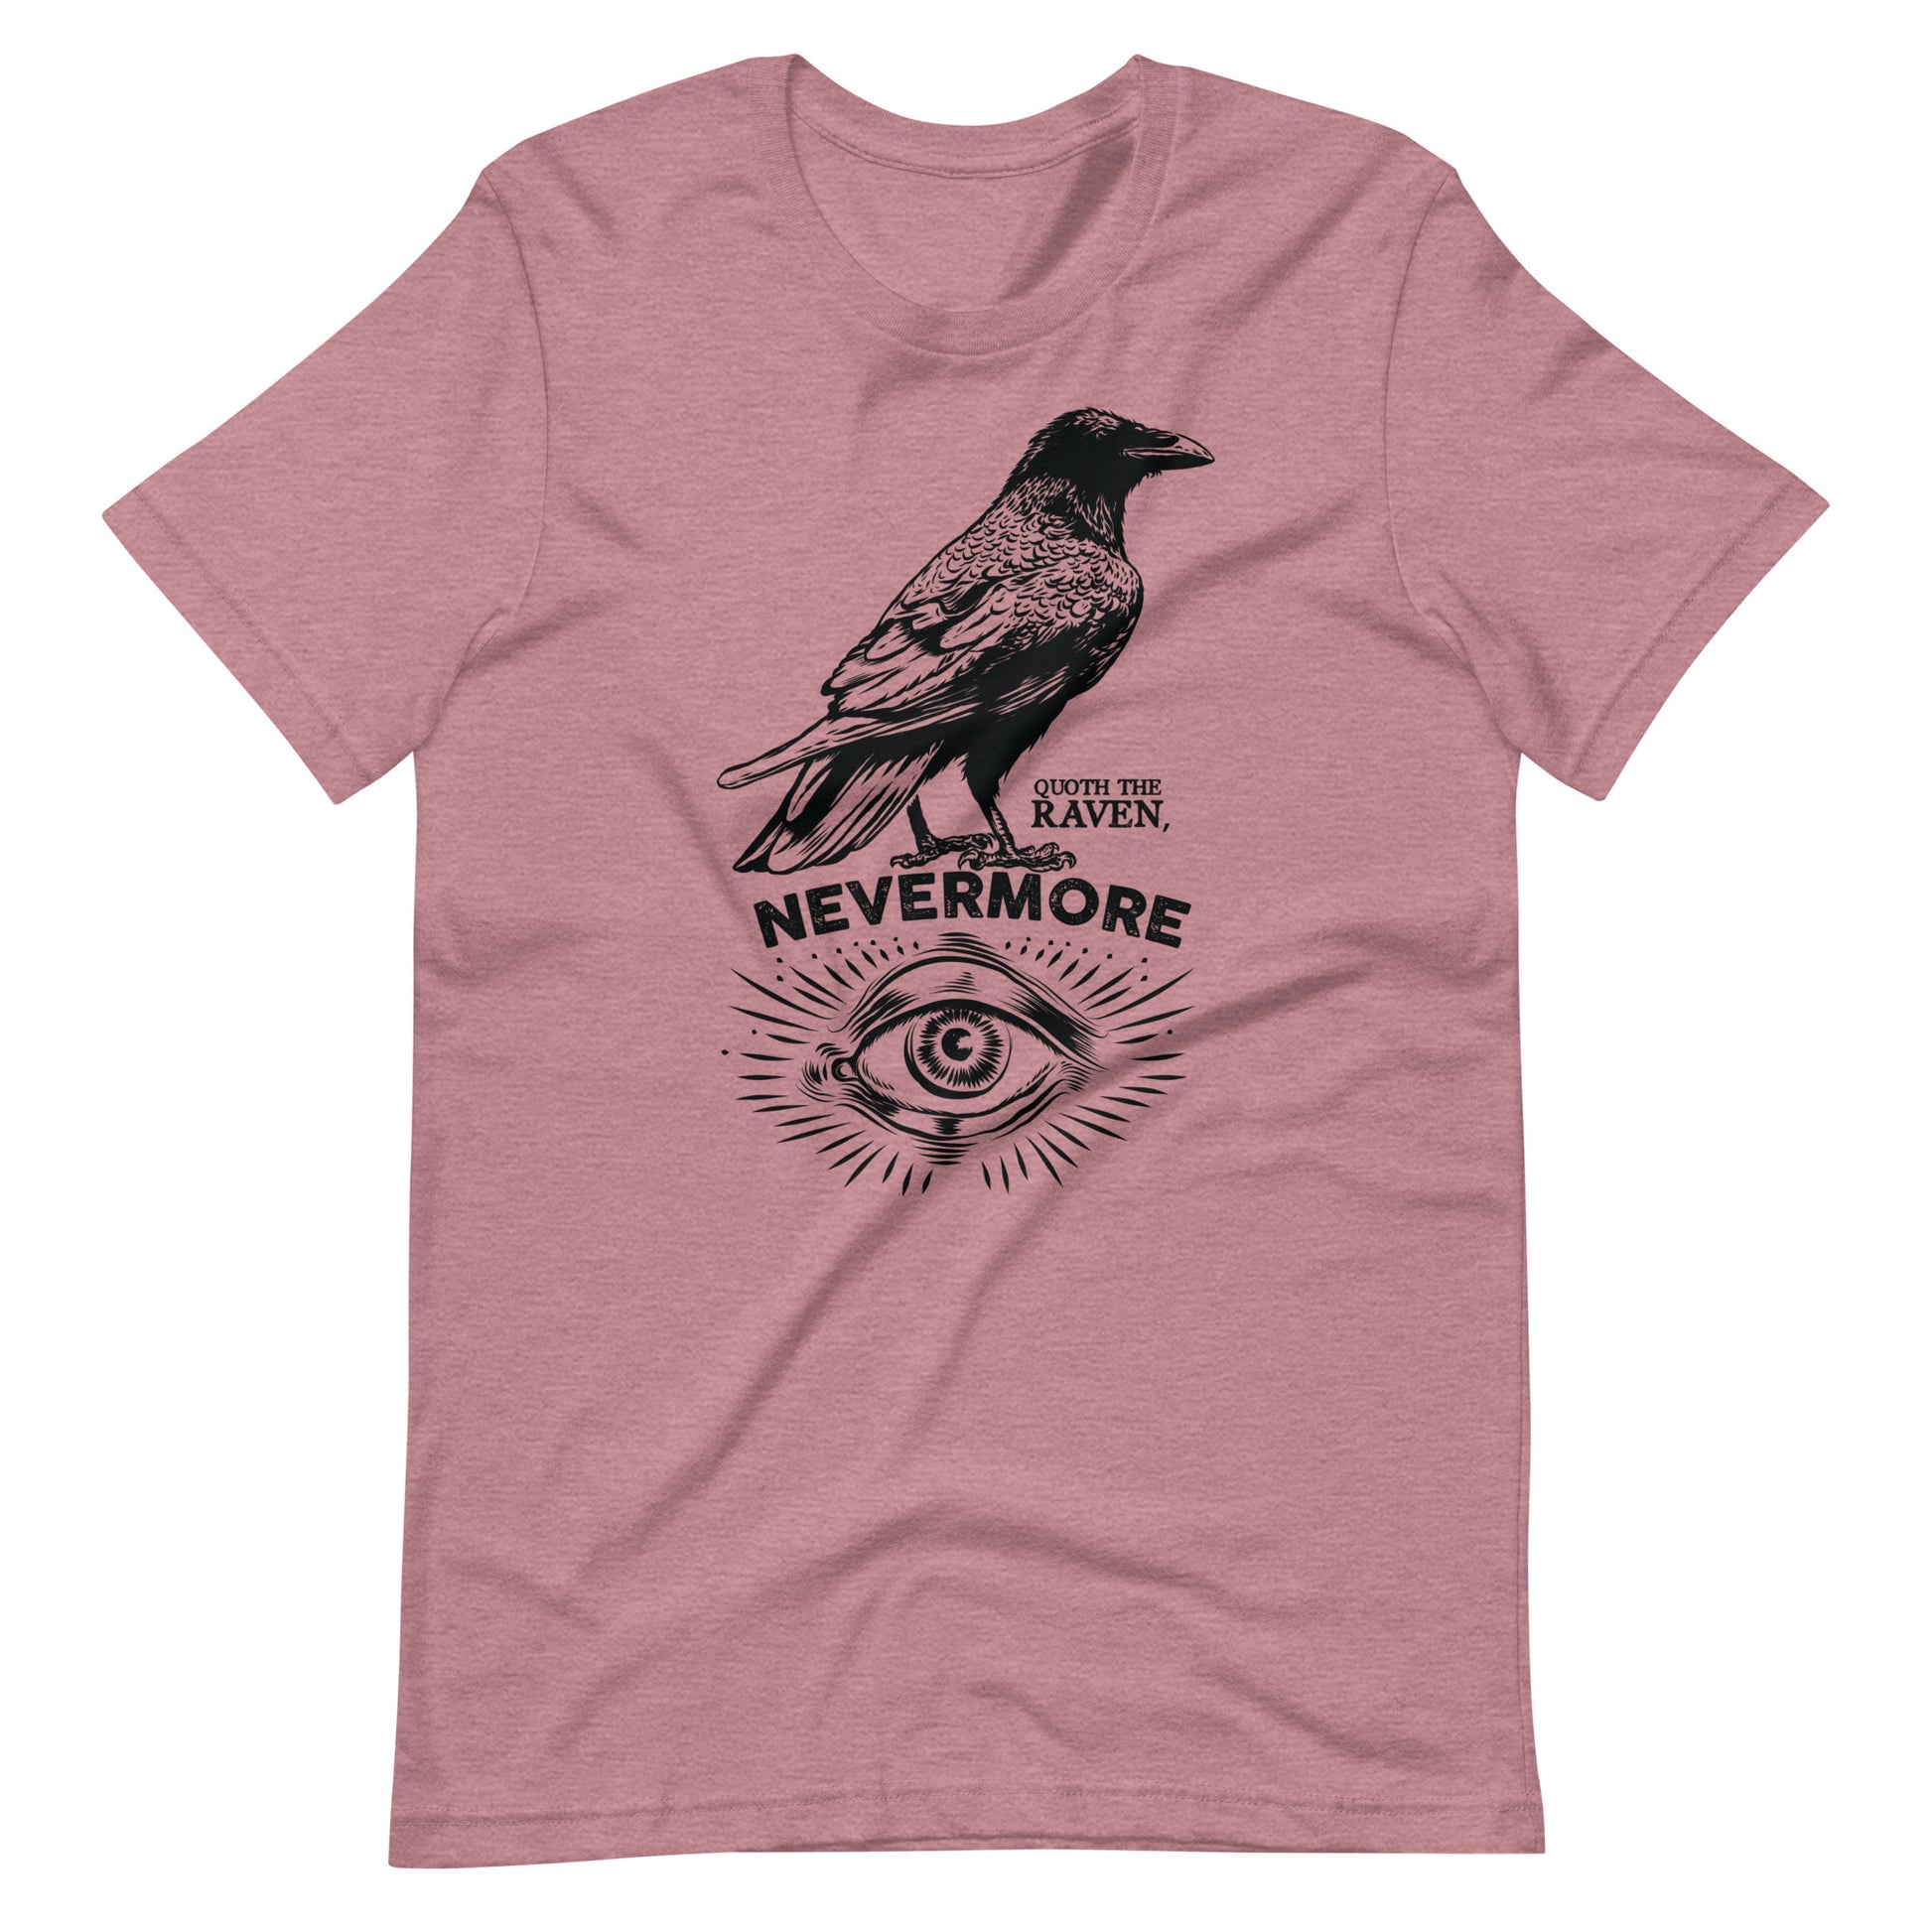 Quoth the Raven Nevermore - Men's t-shirt - Heather Orchid Front